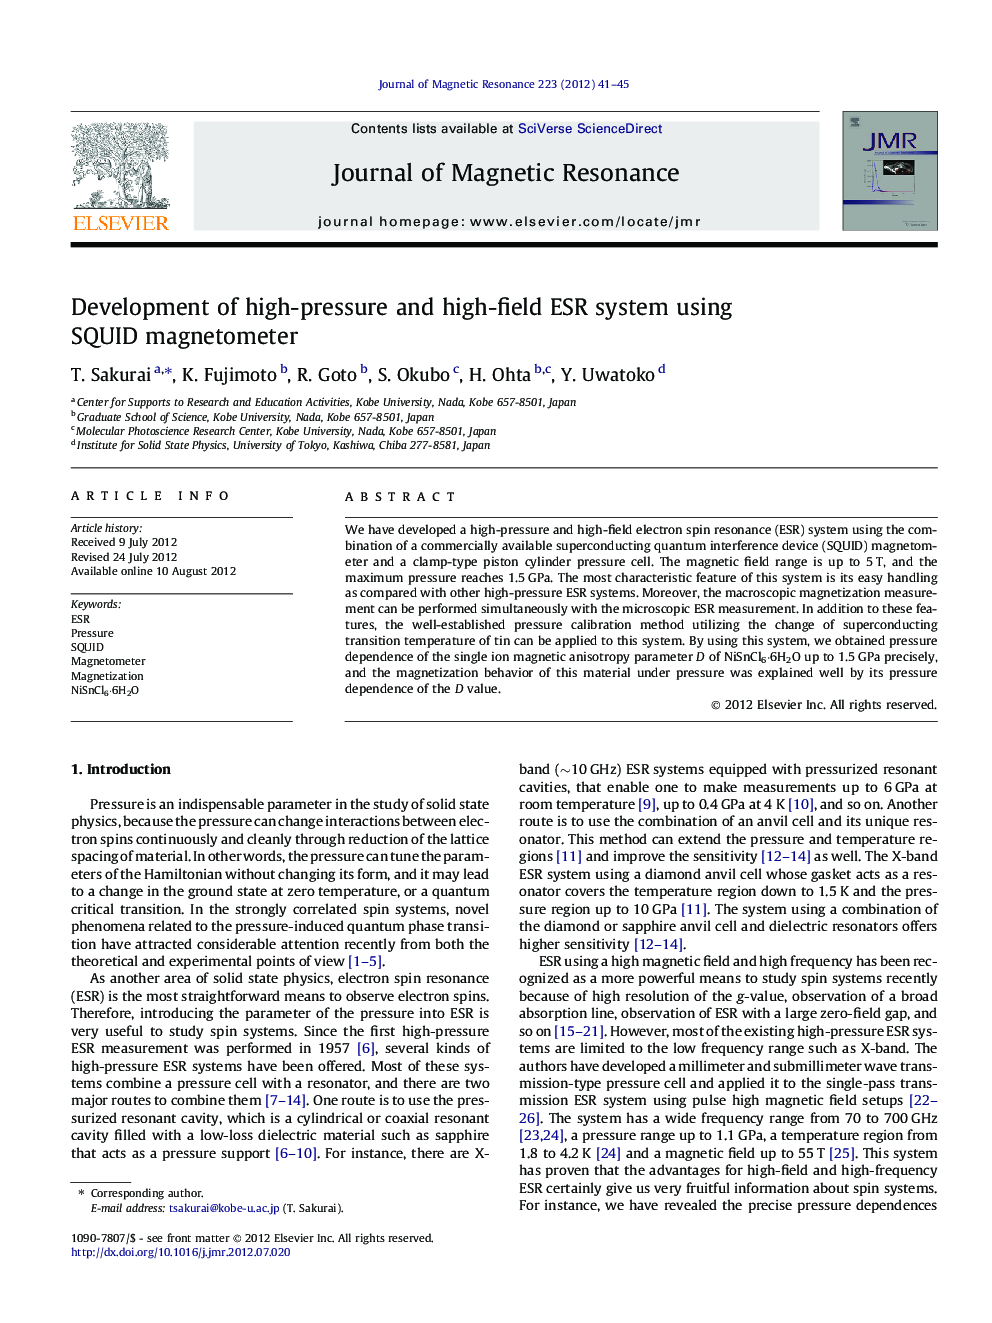 Development of high-pressure and high-field ESR system using SQUID magnetometer